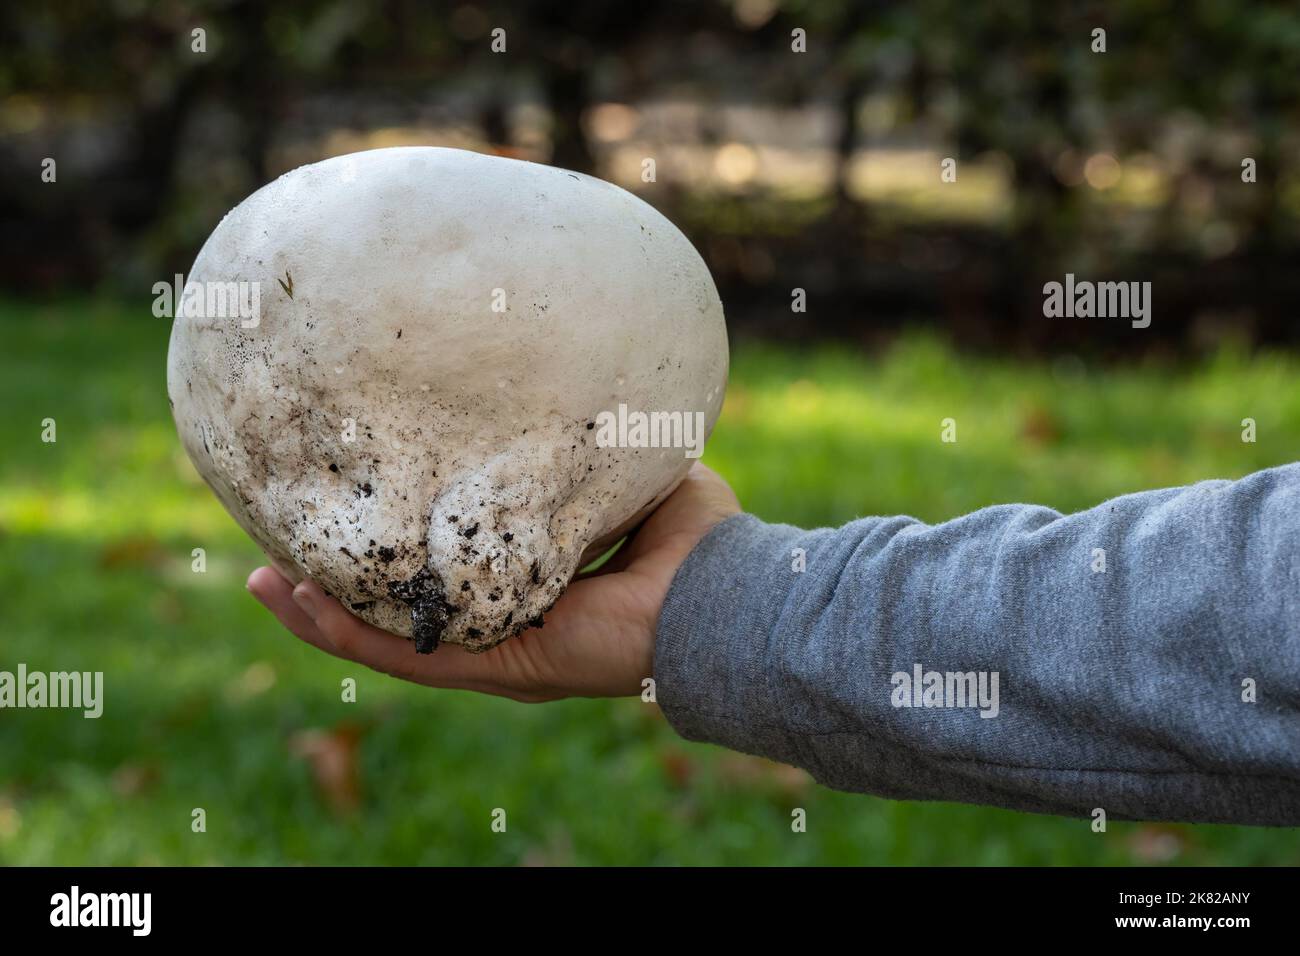 Calvatia gigantea, commonly known as the giant puffball mushroom displayed in hand, selective focus Stock Photo